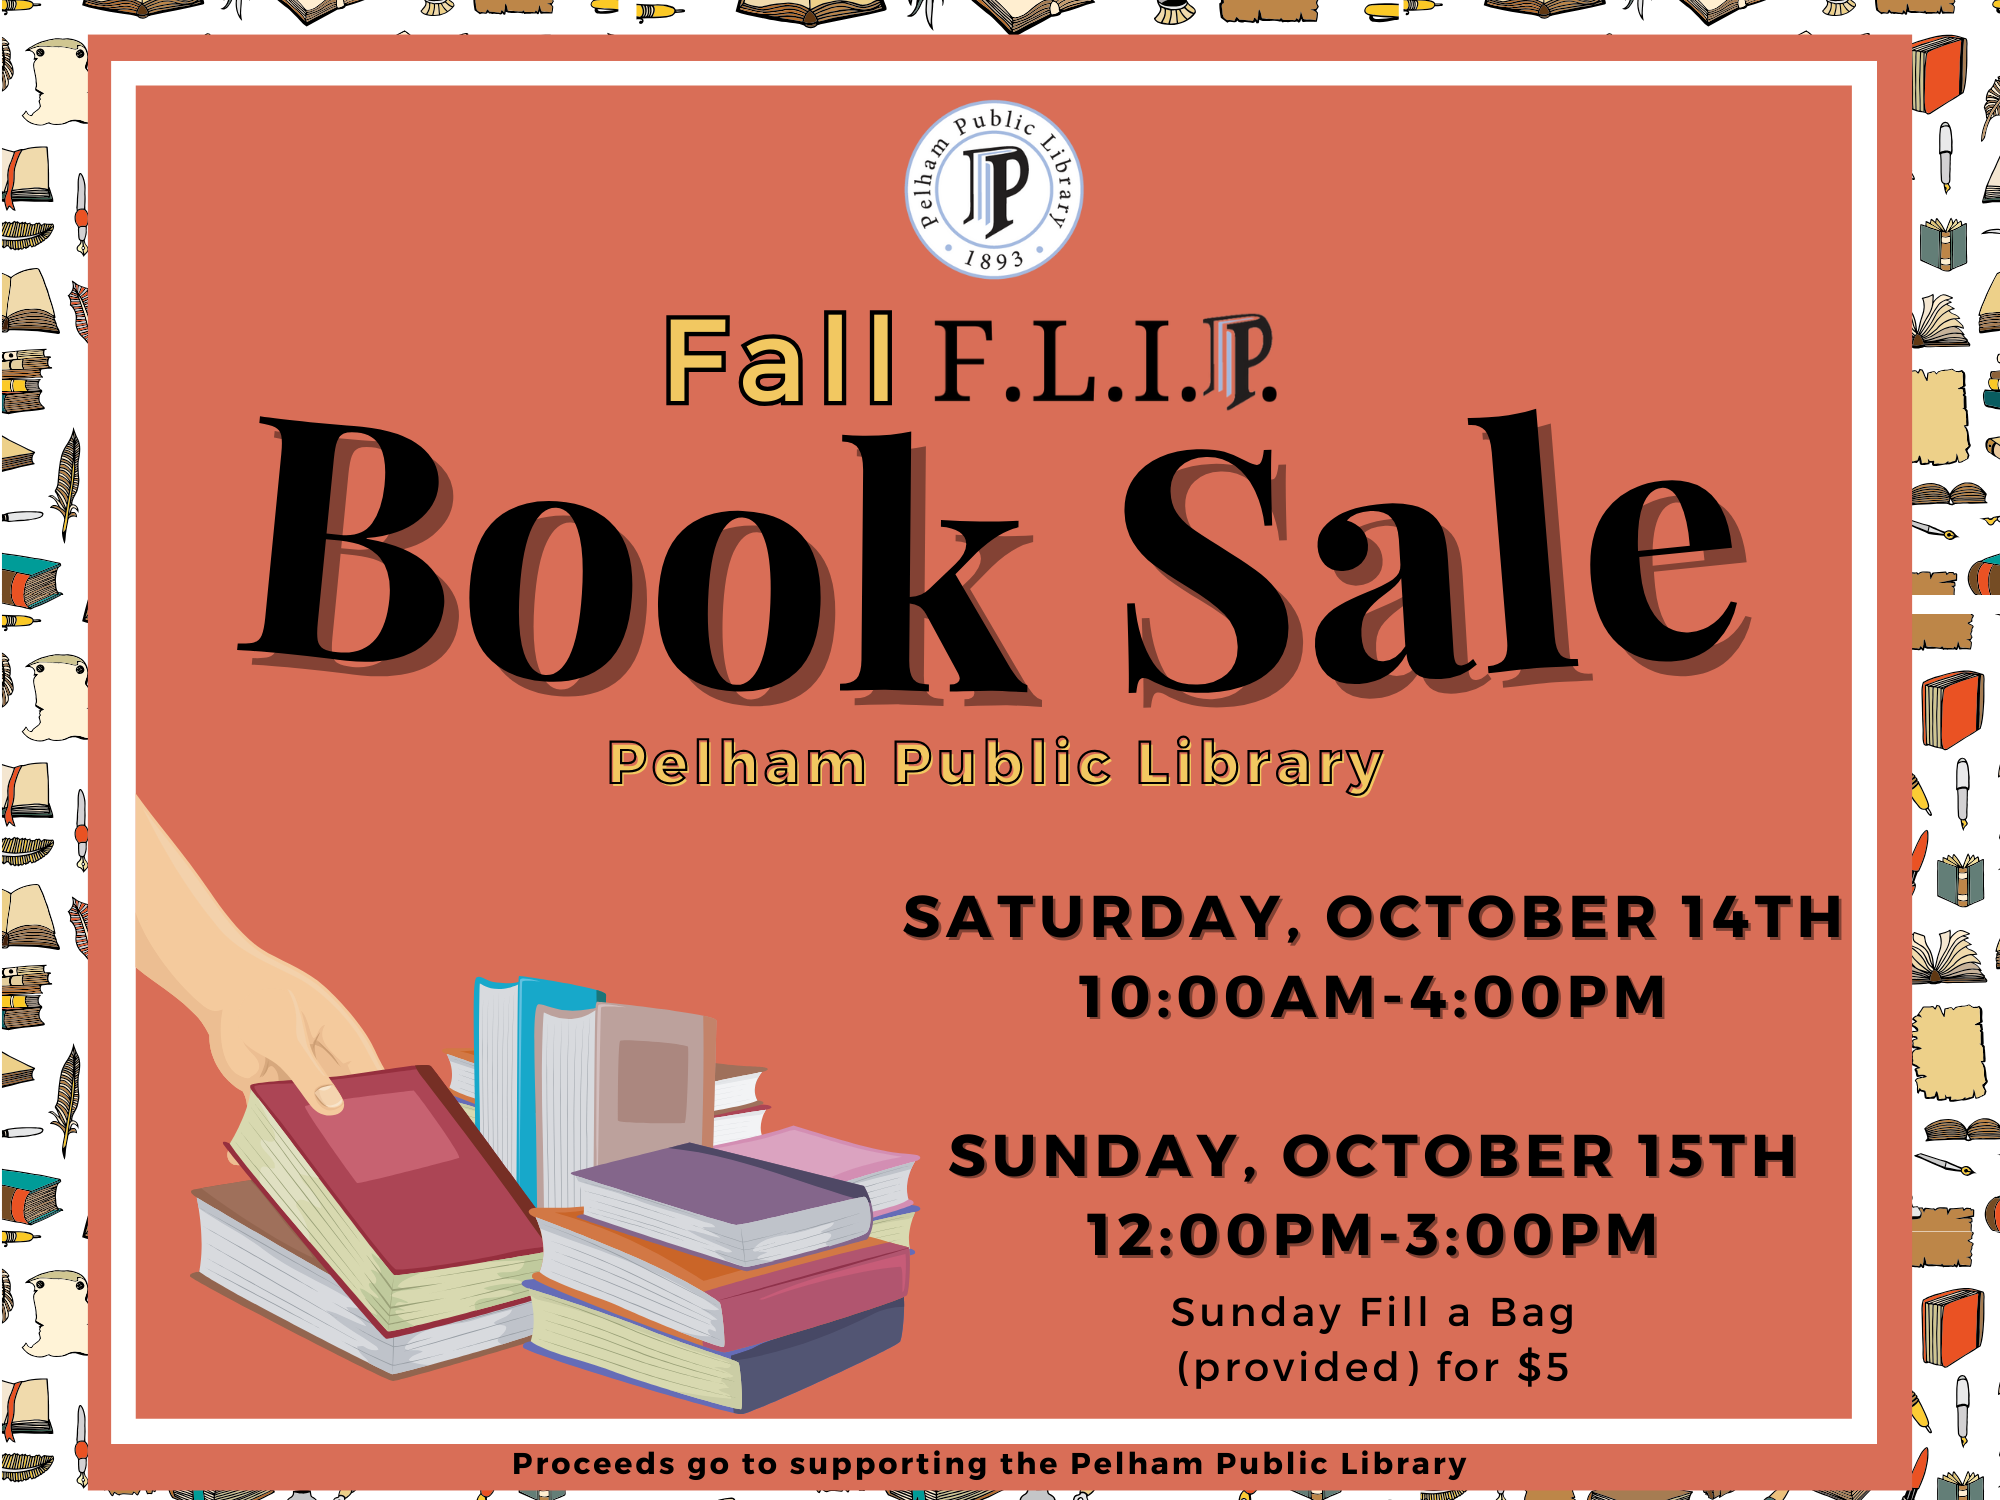 Fall F.L.I.P. Booksale: Saturday October 14th @ 10AM, Sunday October 15th @12PM